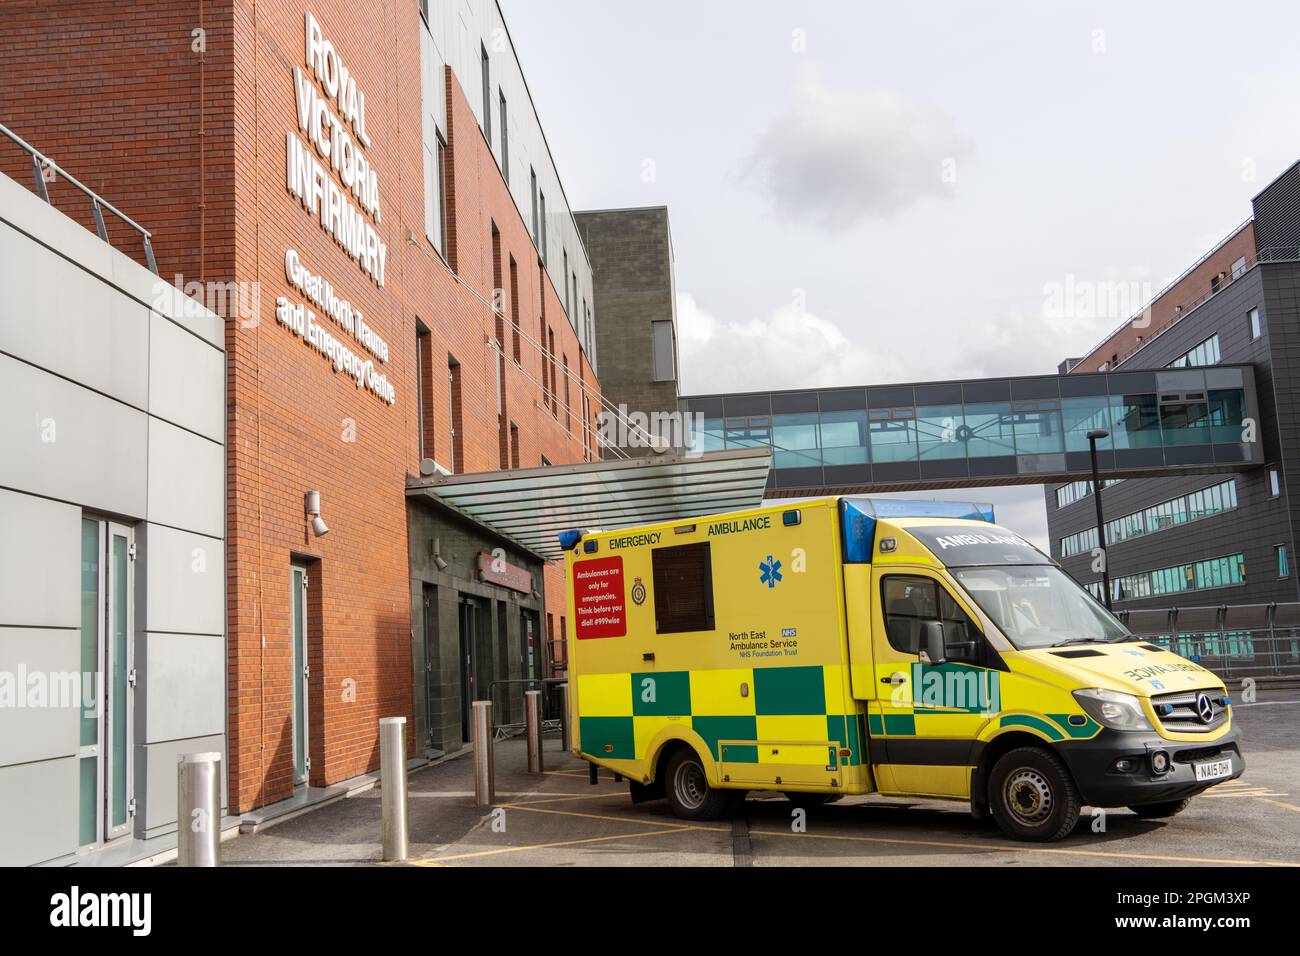 An ambulance parked outside the Great North Trauma and Emergency Centre in the RVI or Royal Victoria Infirmary hospital in Newcastle upon Tyne, UK. Stock Photo